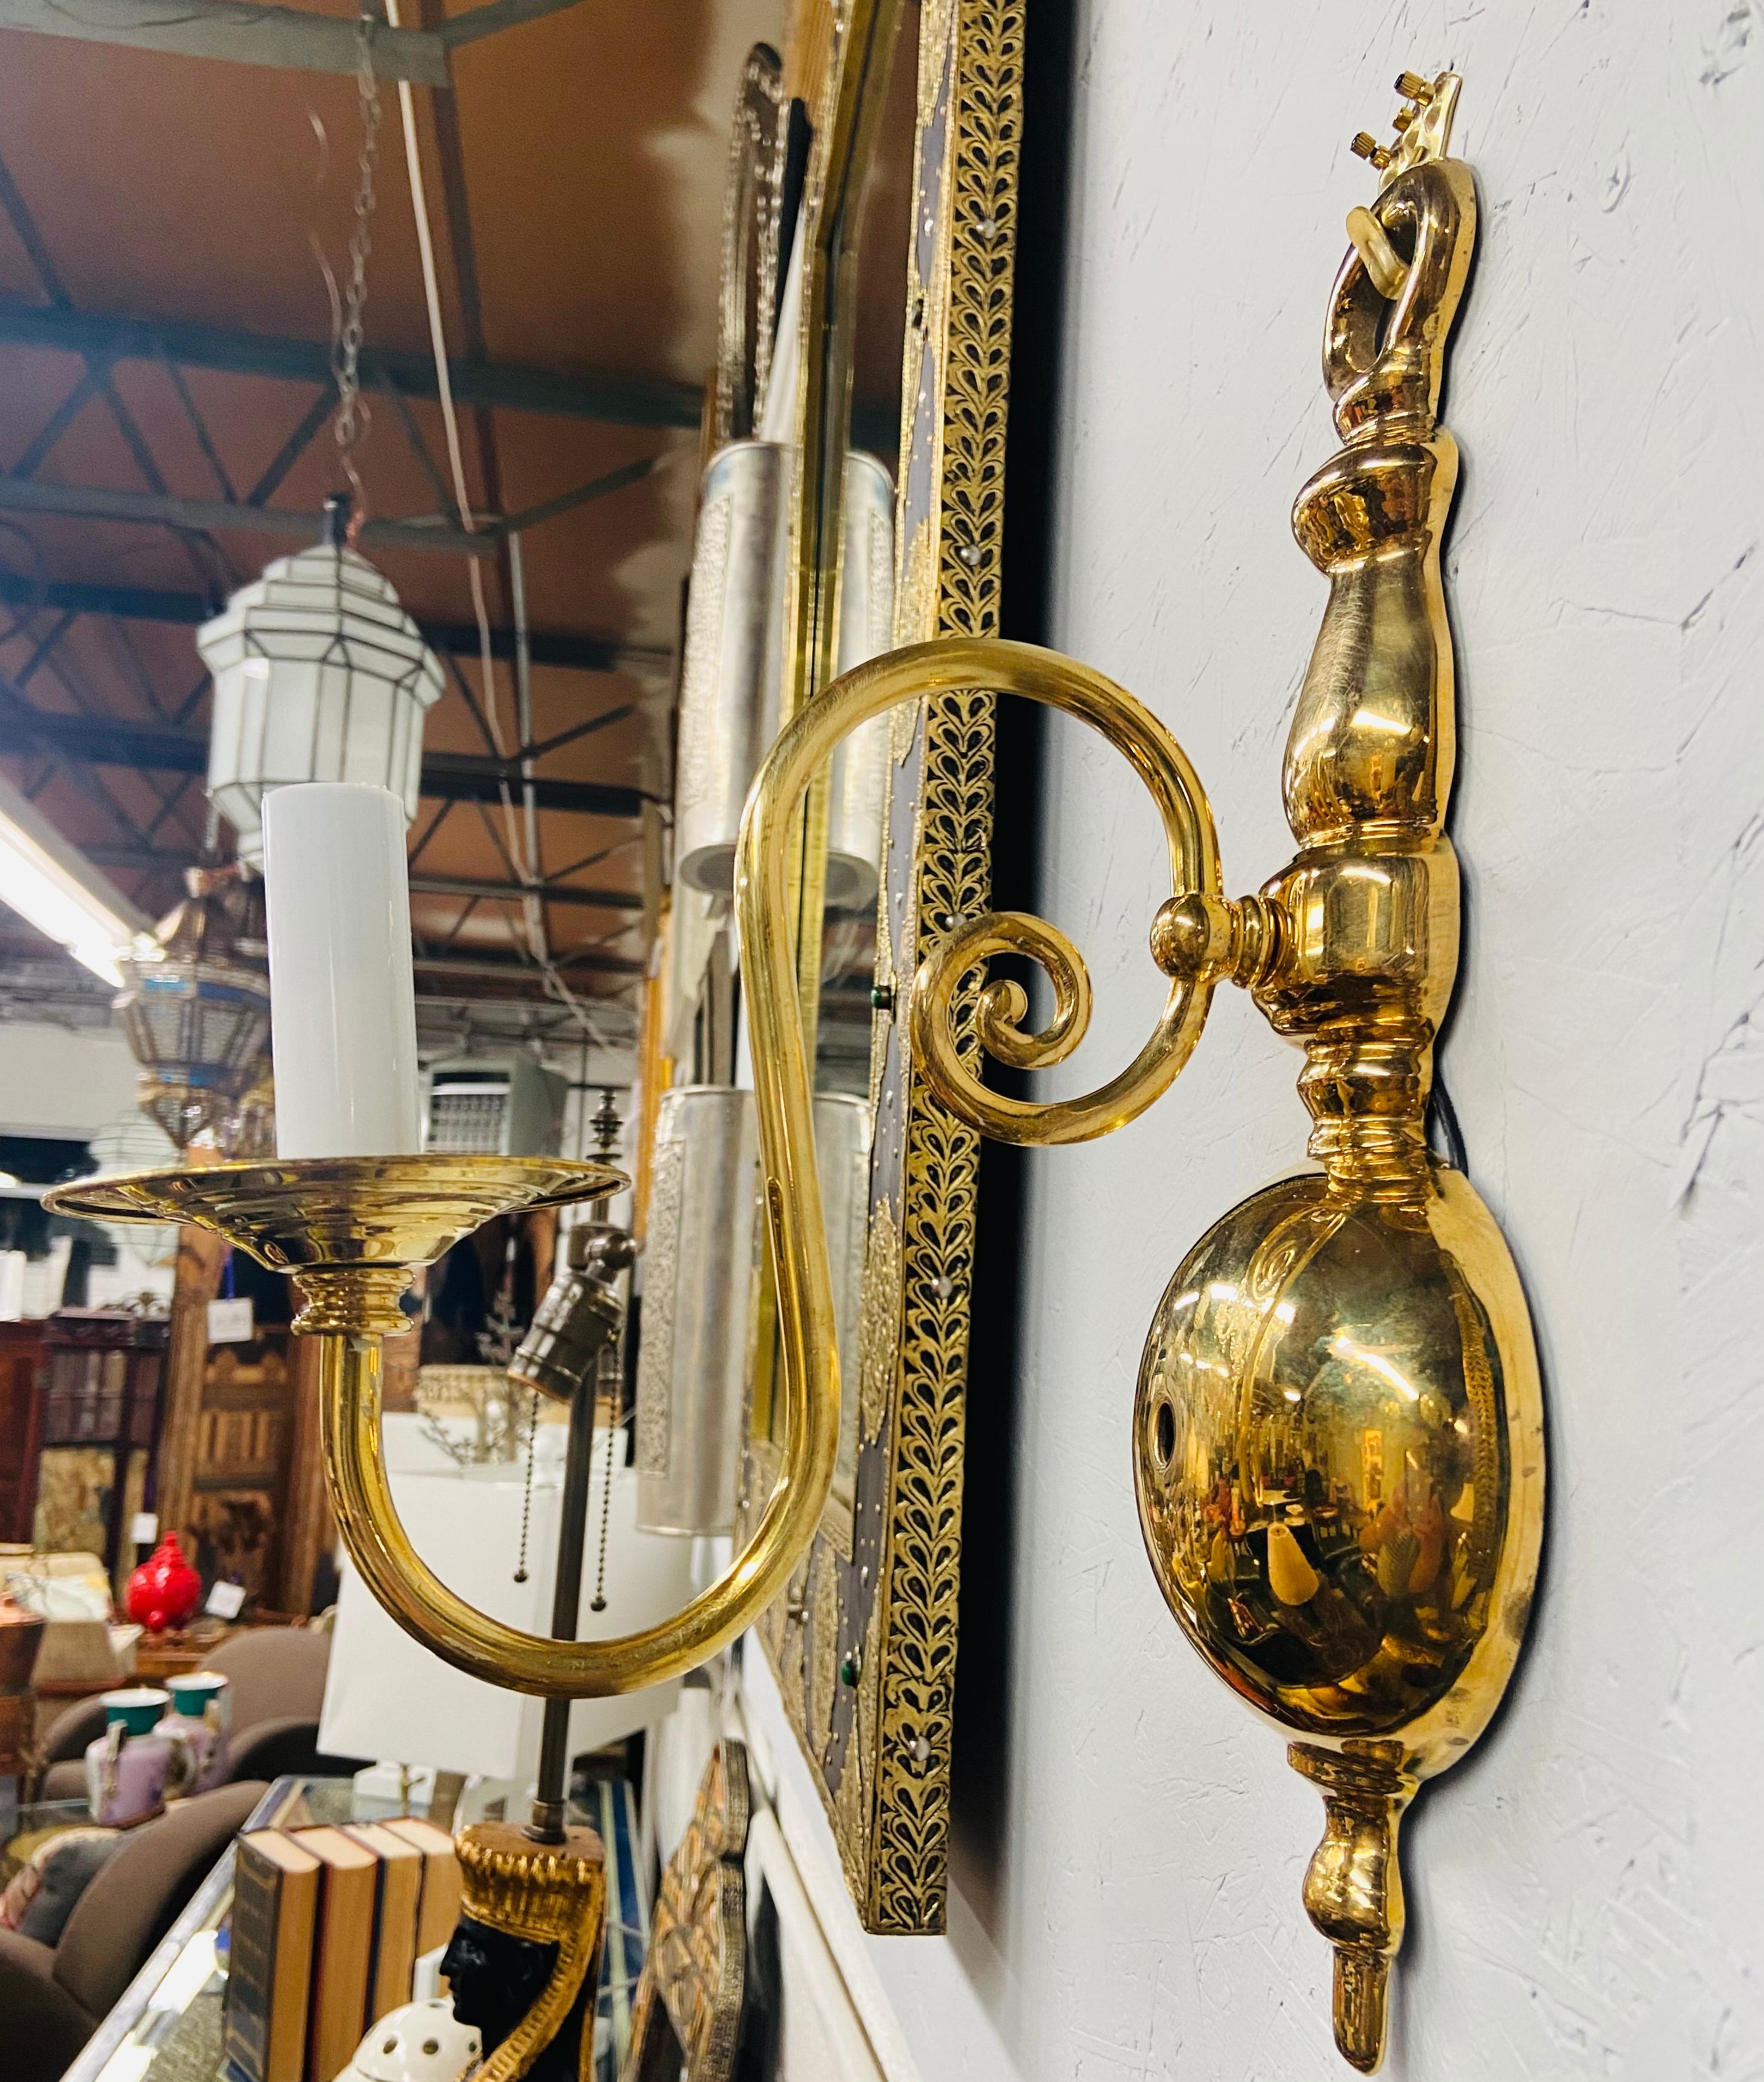 A pair of Georgian brass wall sconces. Each sconce holds one candelabra and with a fine arm ending in a scroll design. Classy and refined, this pair will add of sophistication to your wall design.

Dimensions: 13